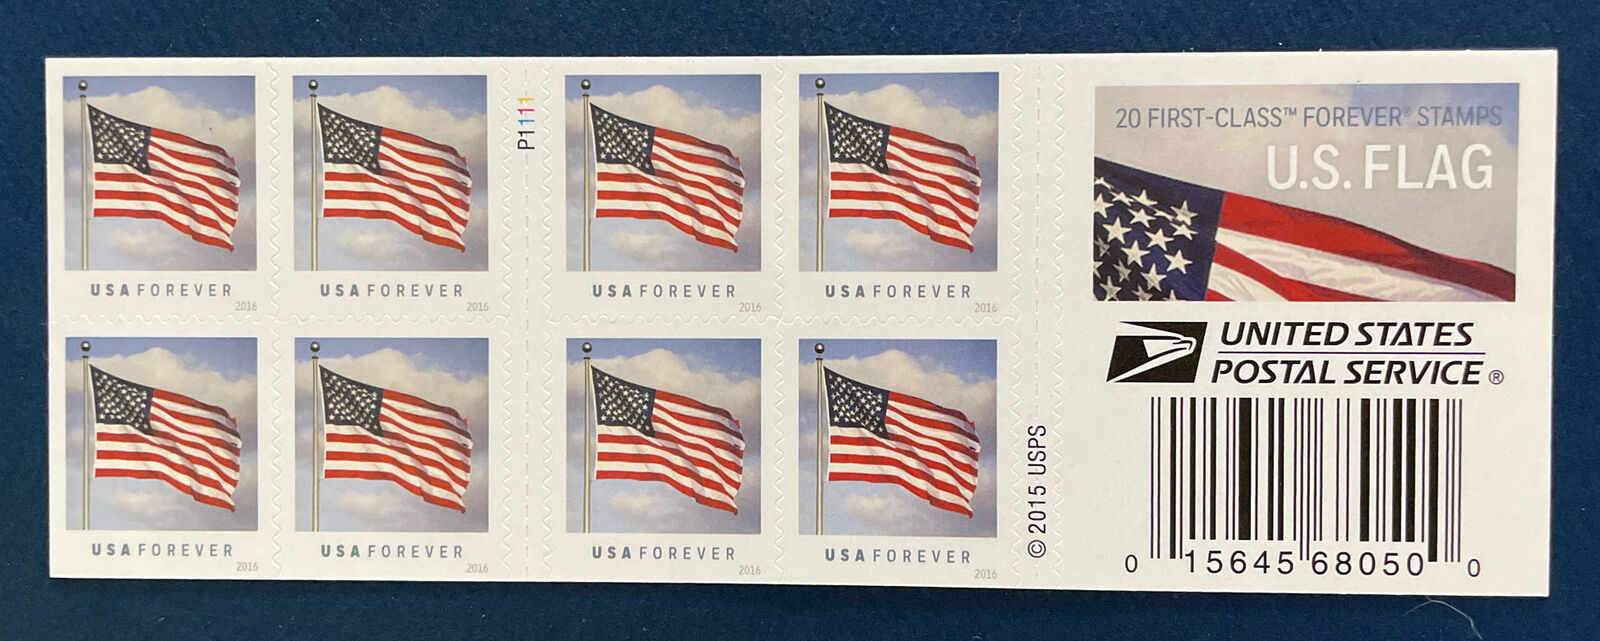 Scott 5055a U. S. Flag Booklet Pane Of 20 Us Forever Stamps Mnh 2016 Apu P1111